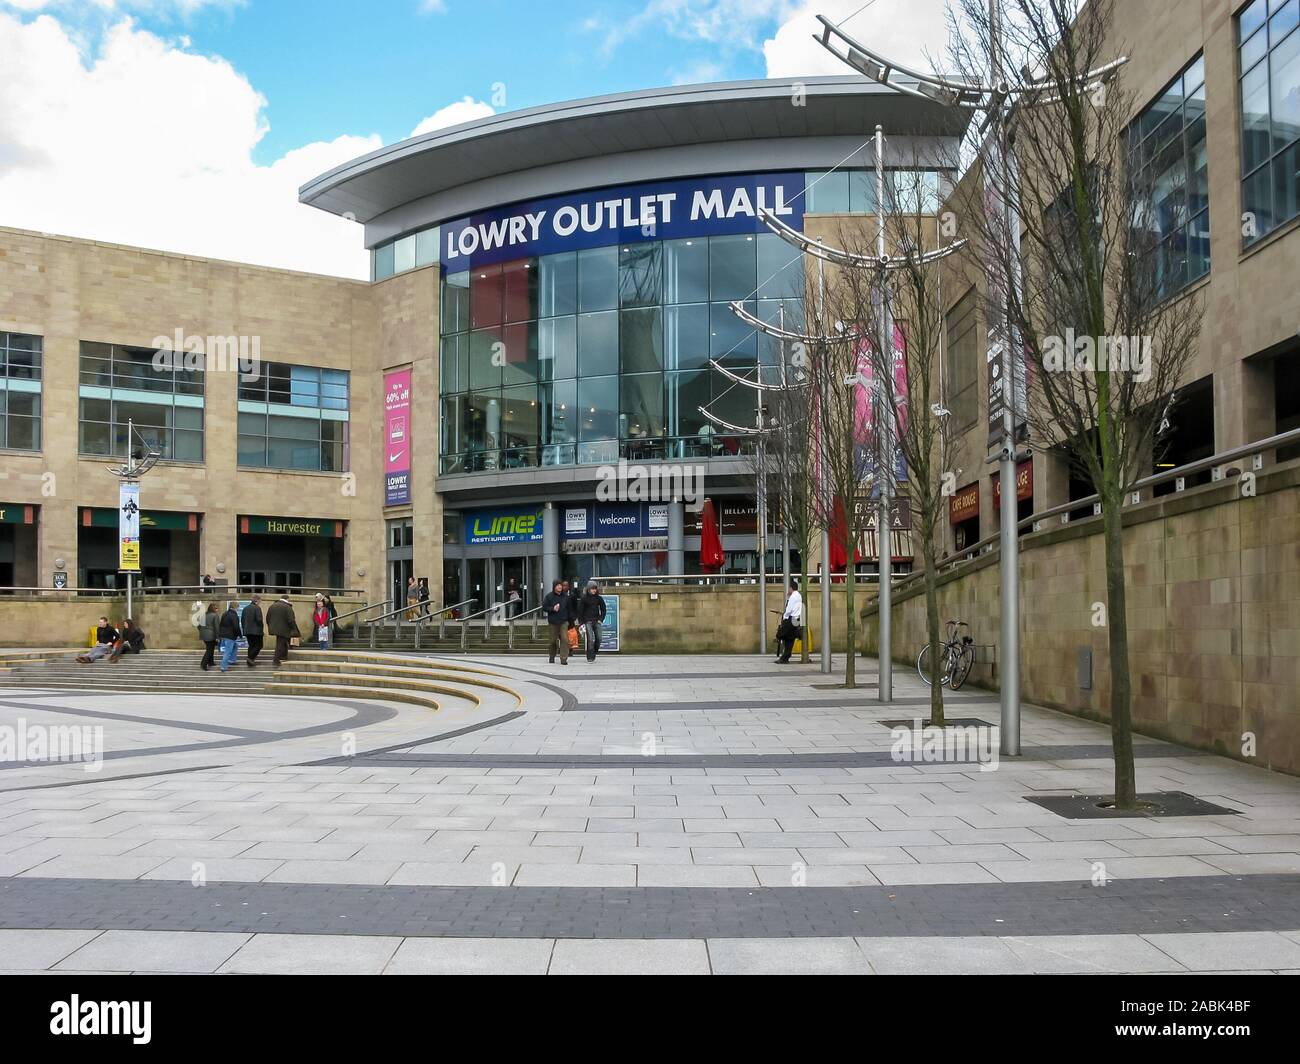 The Lowry Outlet Mall on Lowry Plaza, The Quays, Salford, Manchester, England, UK Stock Photo